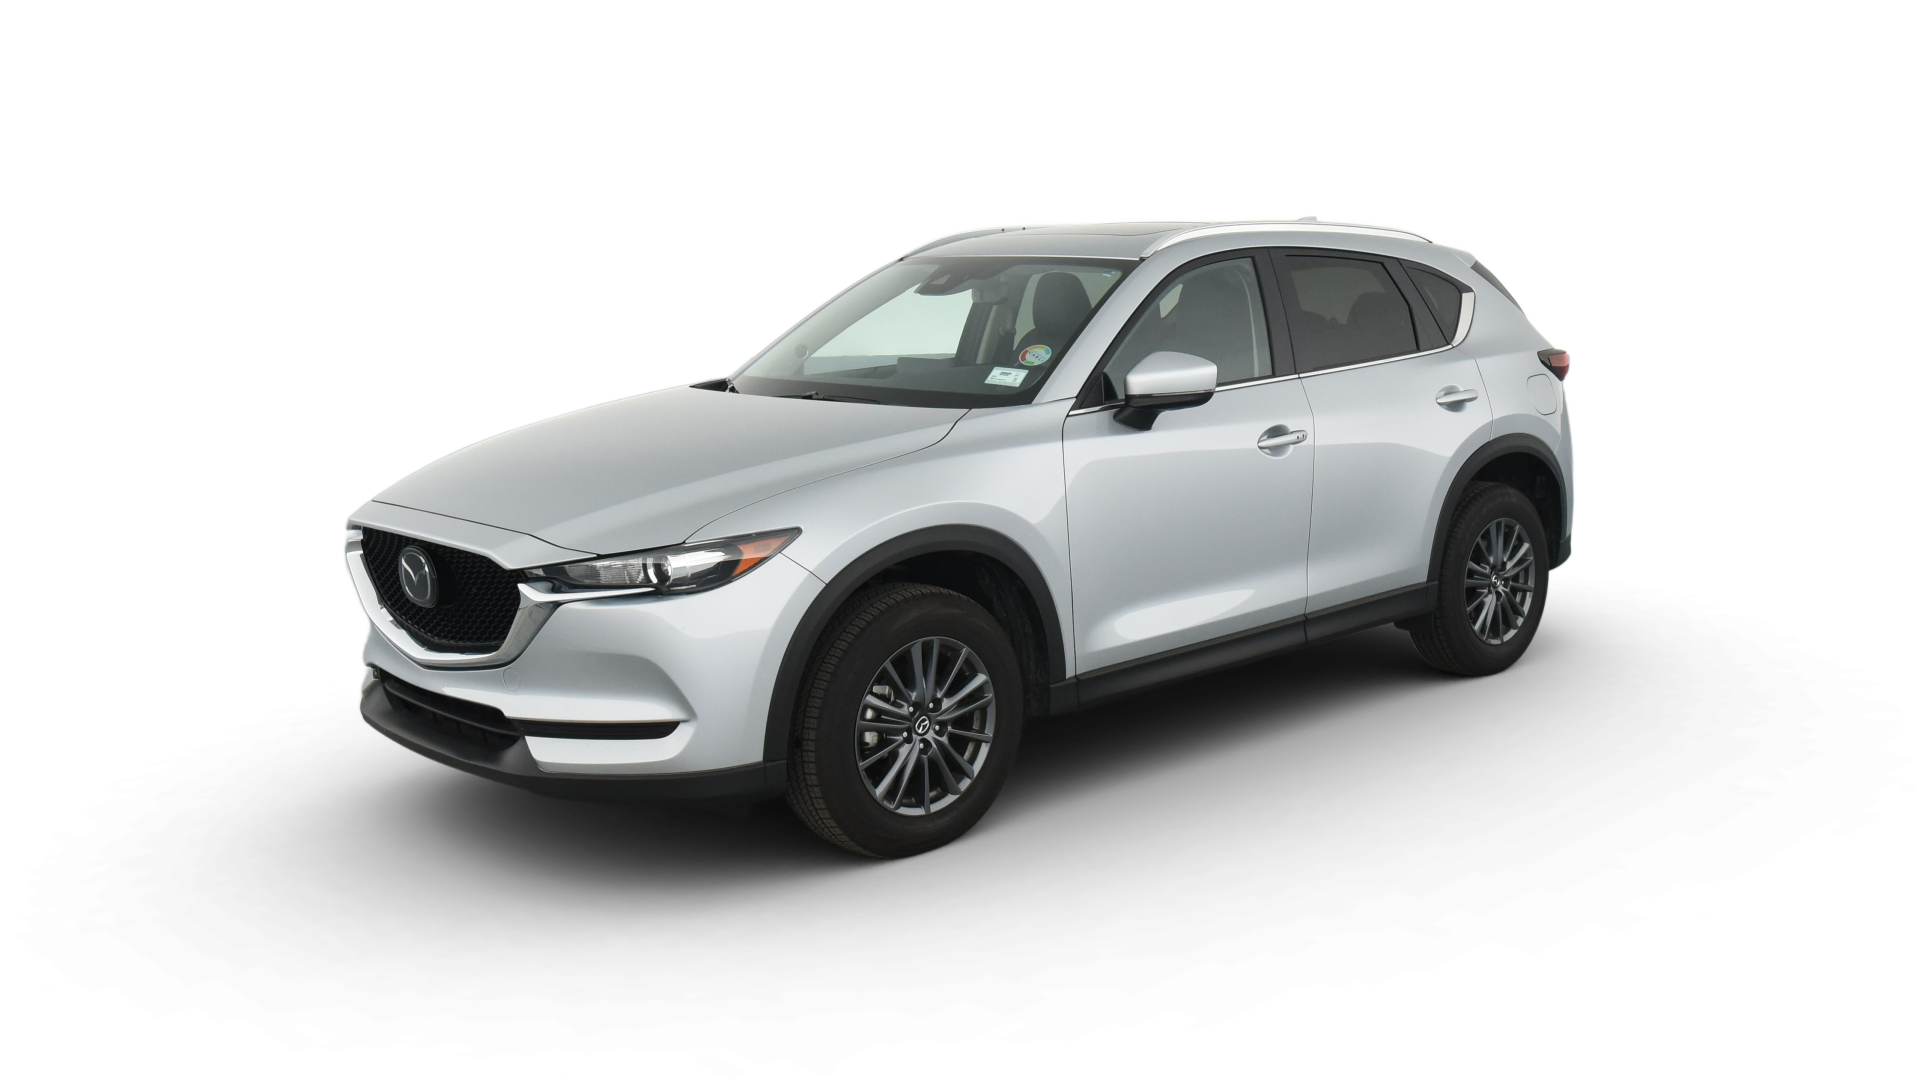 Used Mazda CX-5 for Sale Online